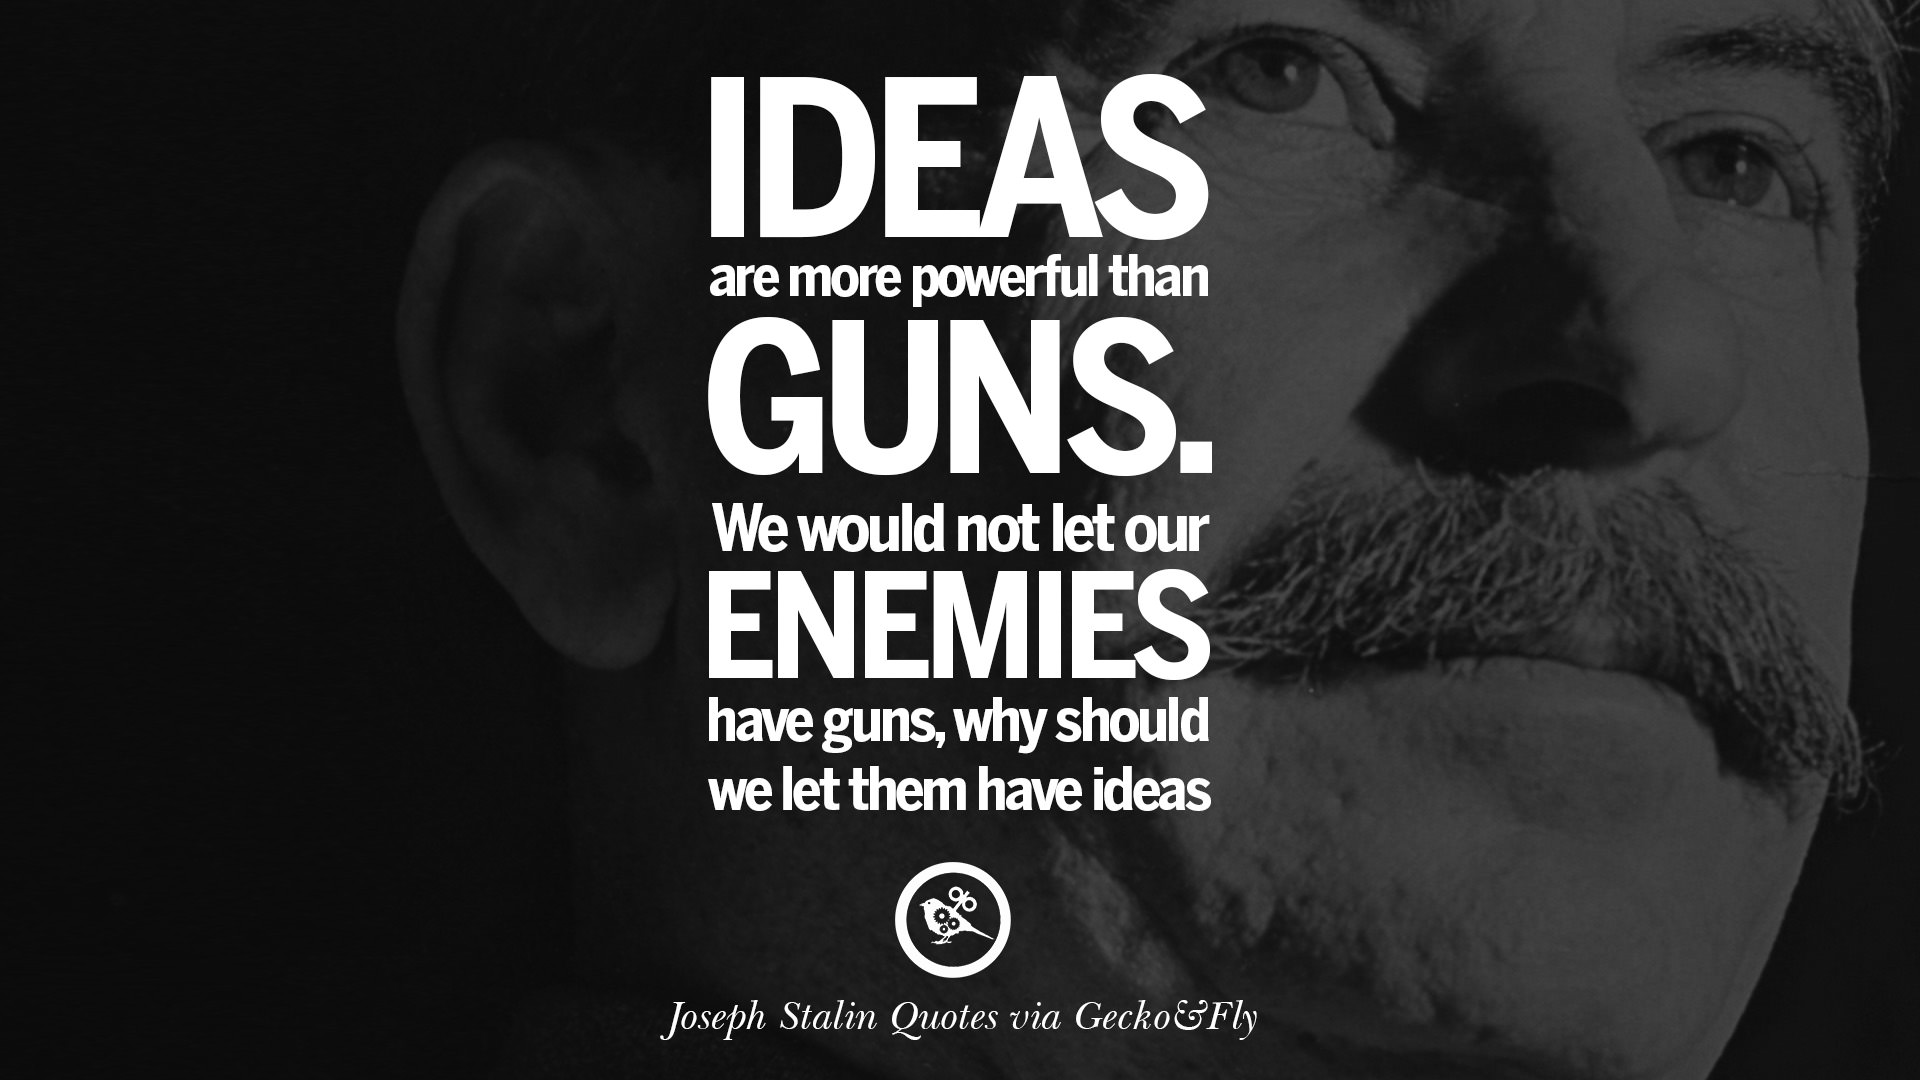 14 Joseph Stalin Quotes on Communism, Freedom, Power, Ideas and Death